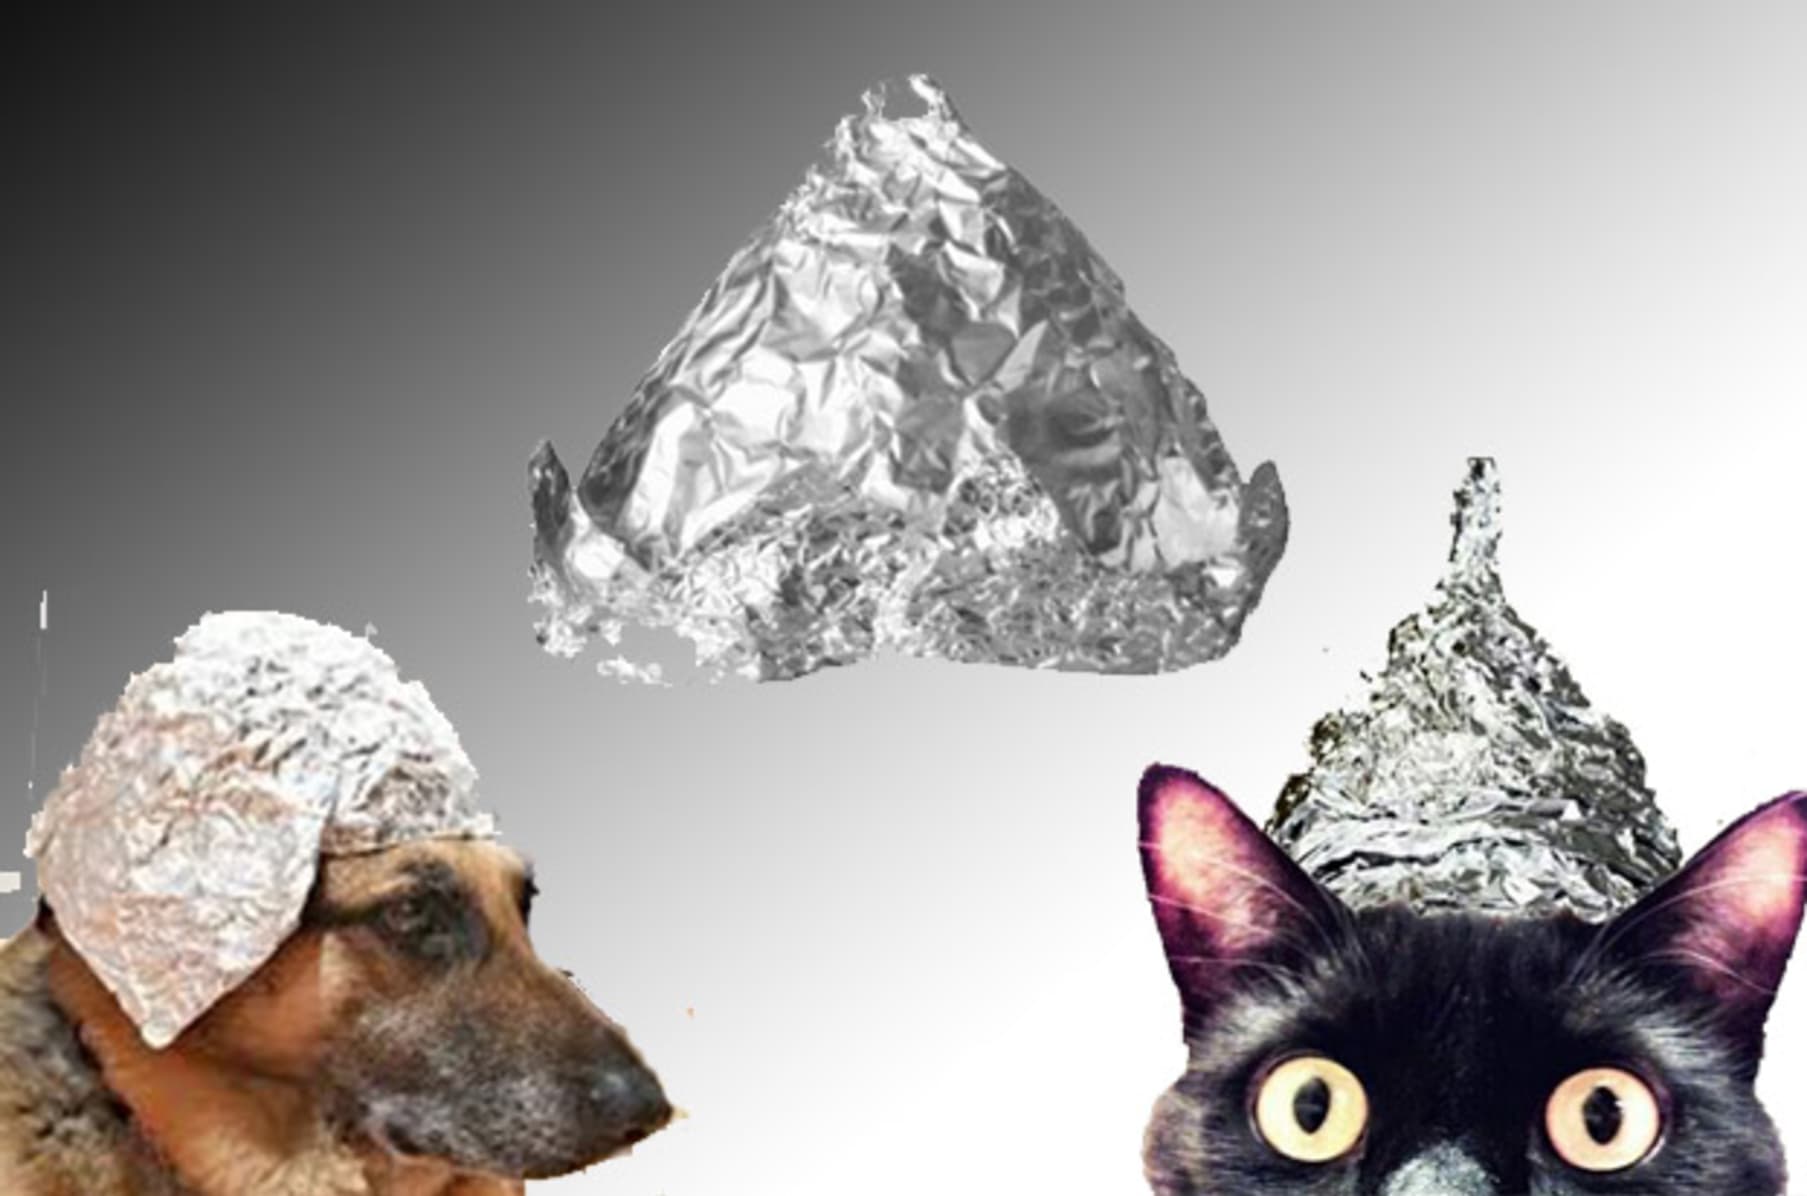 Tin Foil Hats Actually Make it Easier for the Government to Track